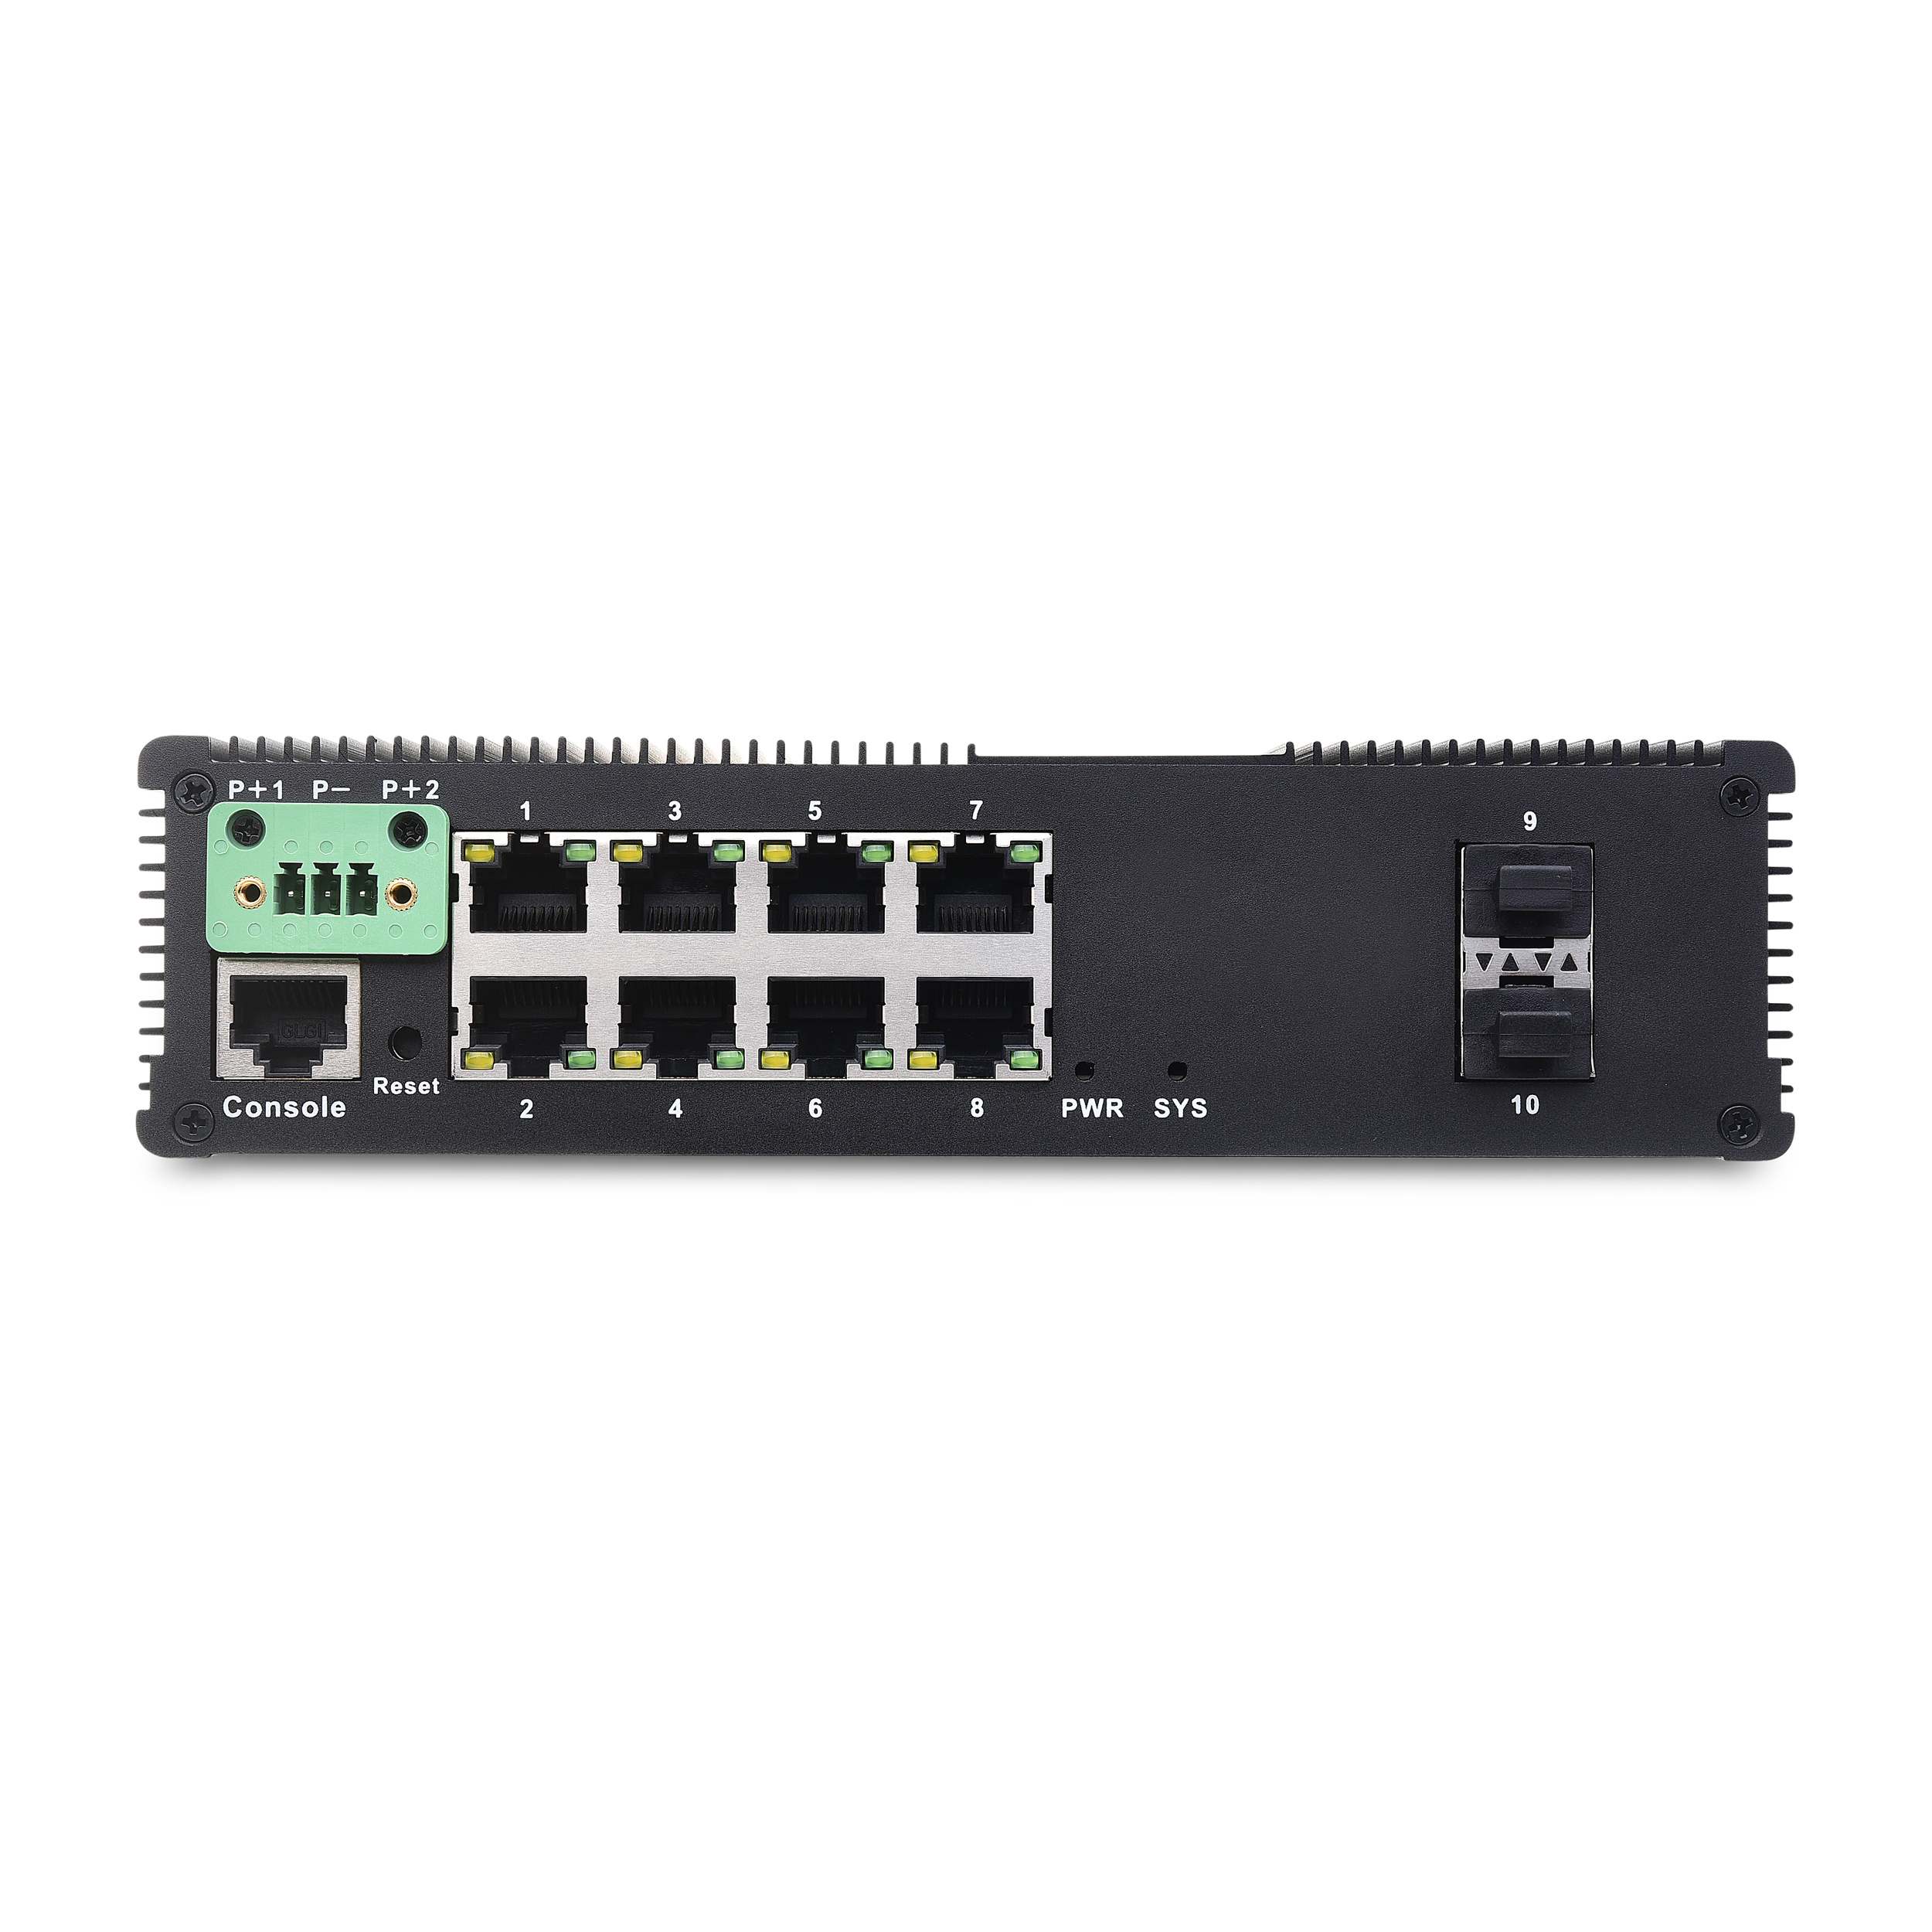 8 10/100/1000TX PoE/PoE+ and 2 1000X SFP Slot | Managed Industrial PoE Switch JHA-MIGS28HP